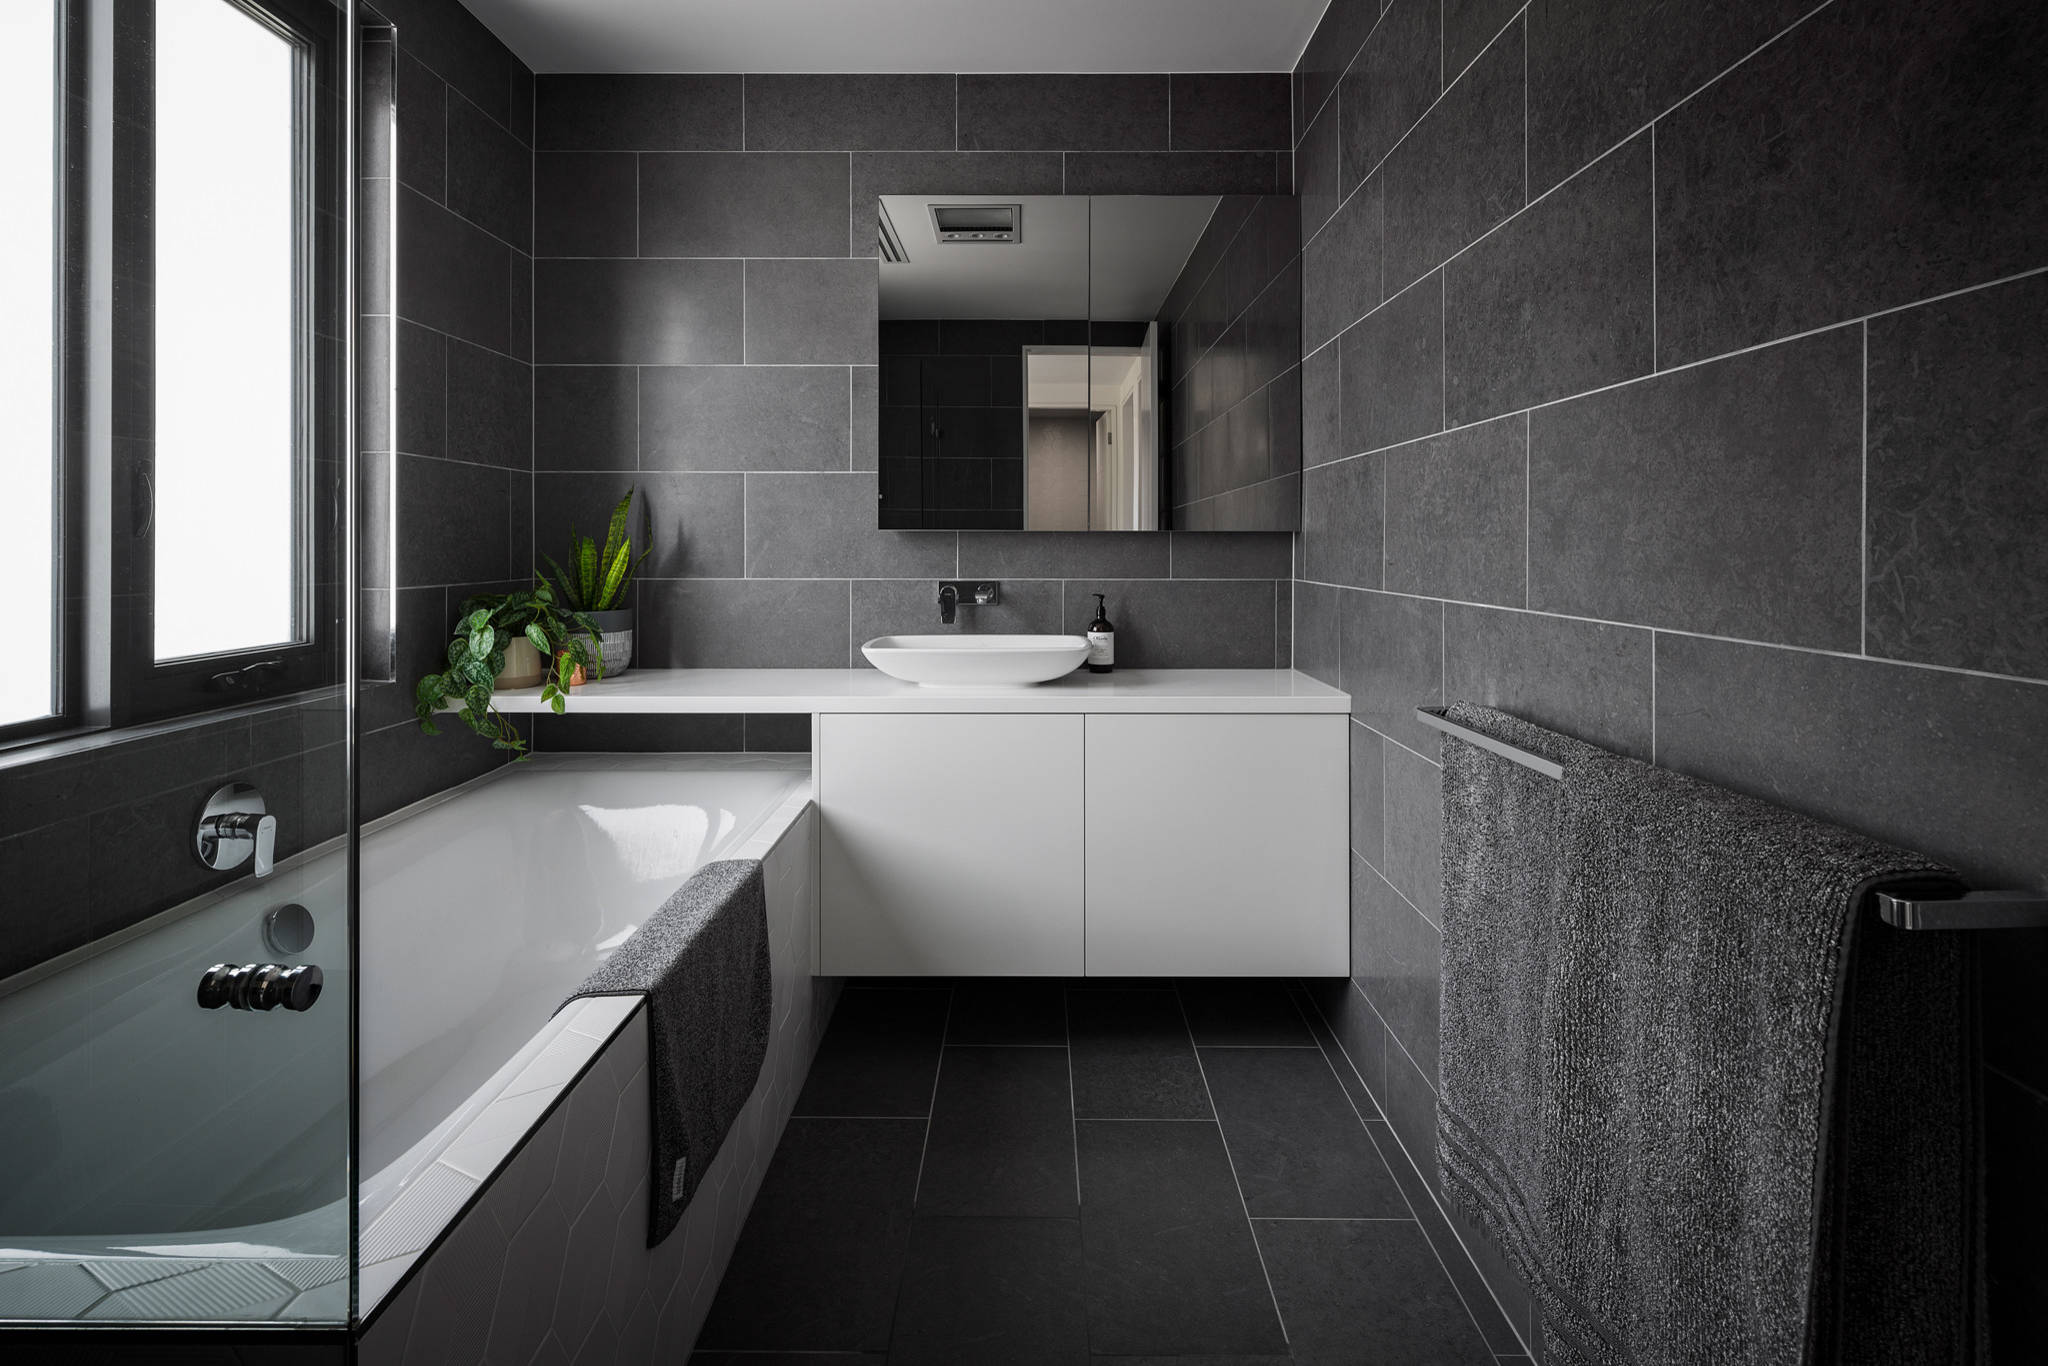 How To Choose Tiles For A Small, What Size Tiles Are Best In Small Bathroom